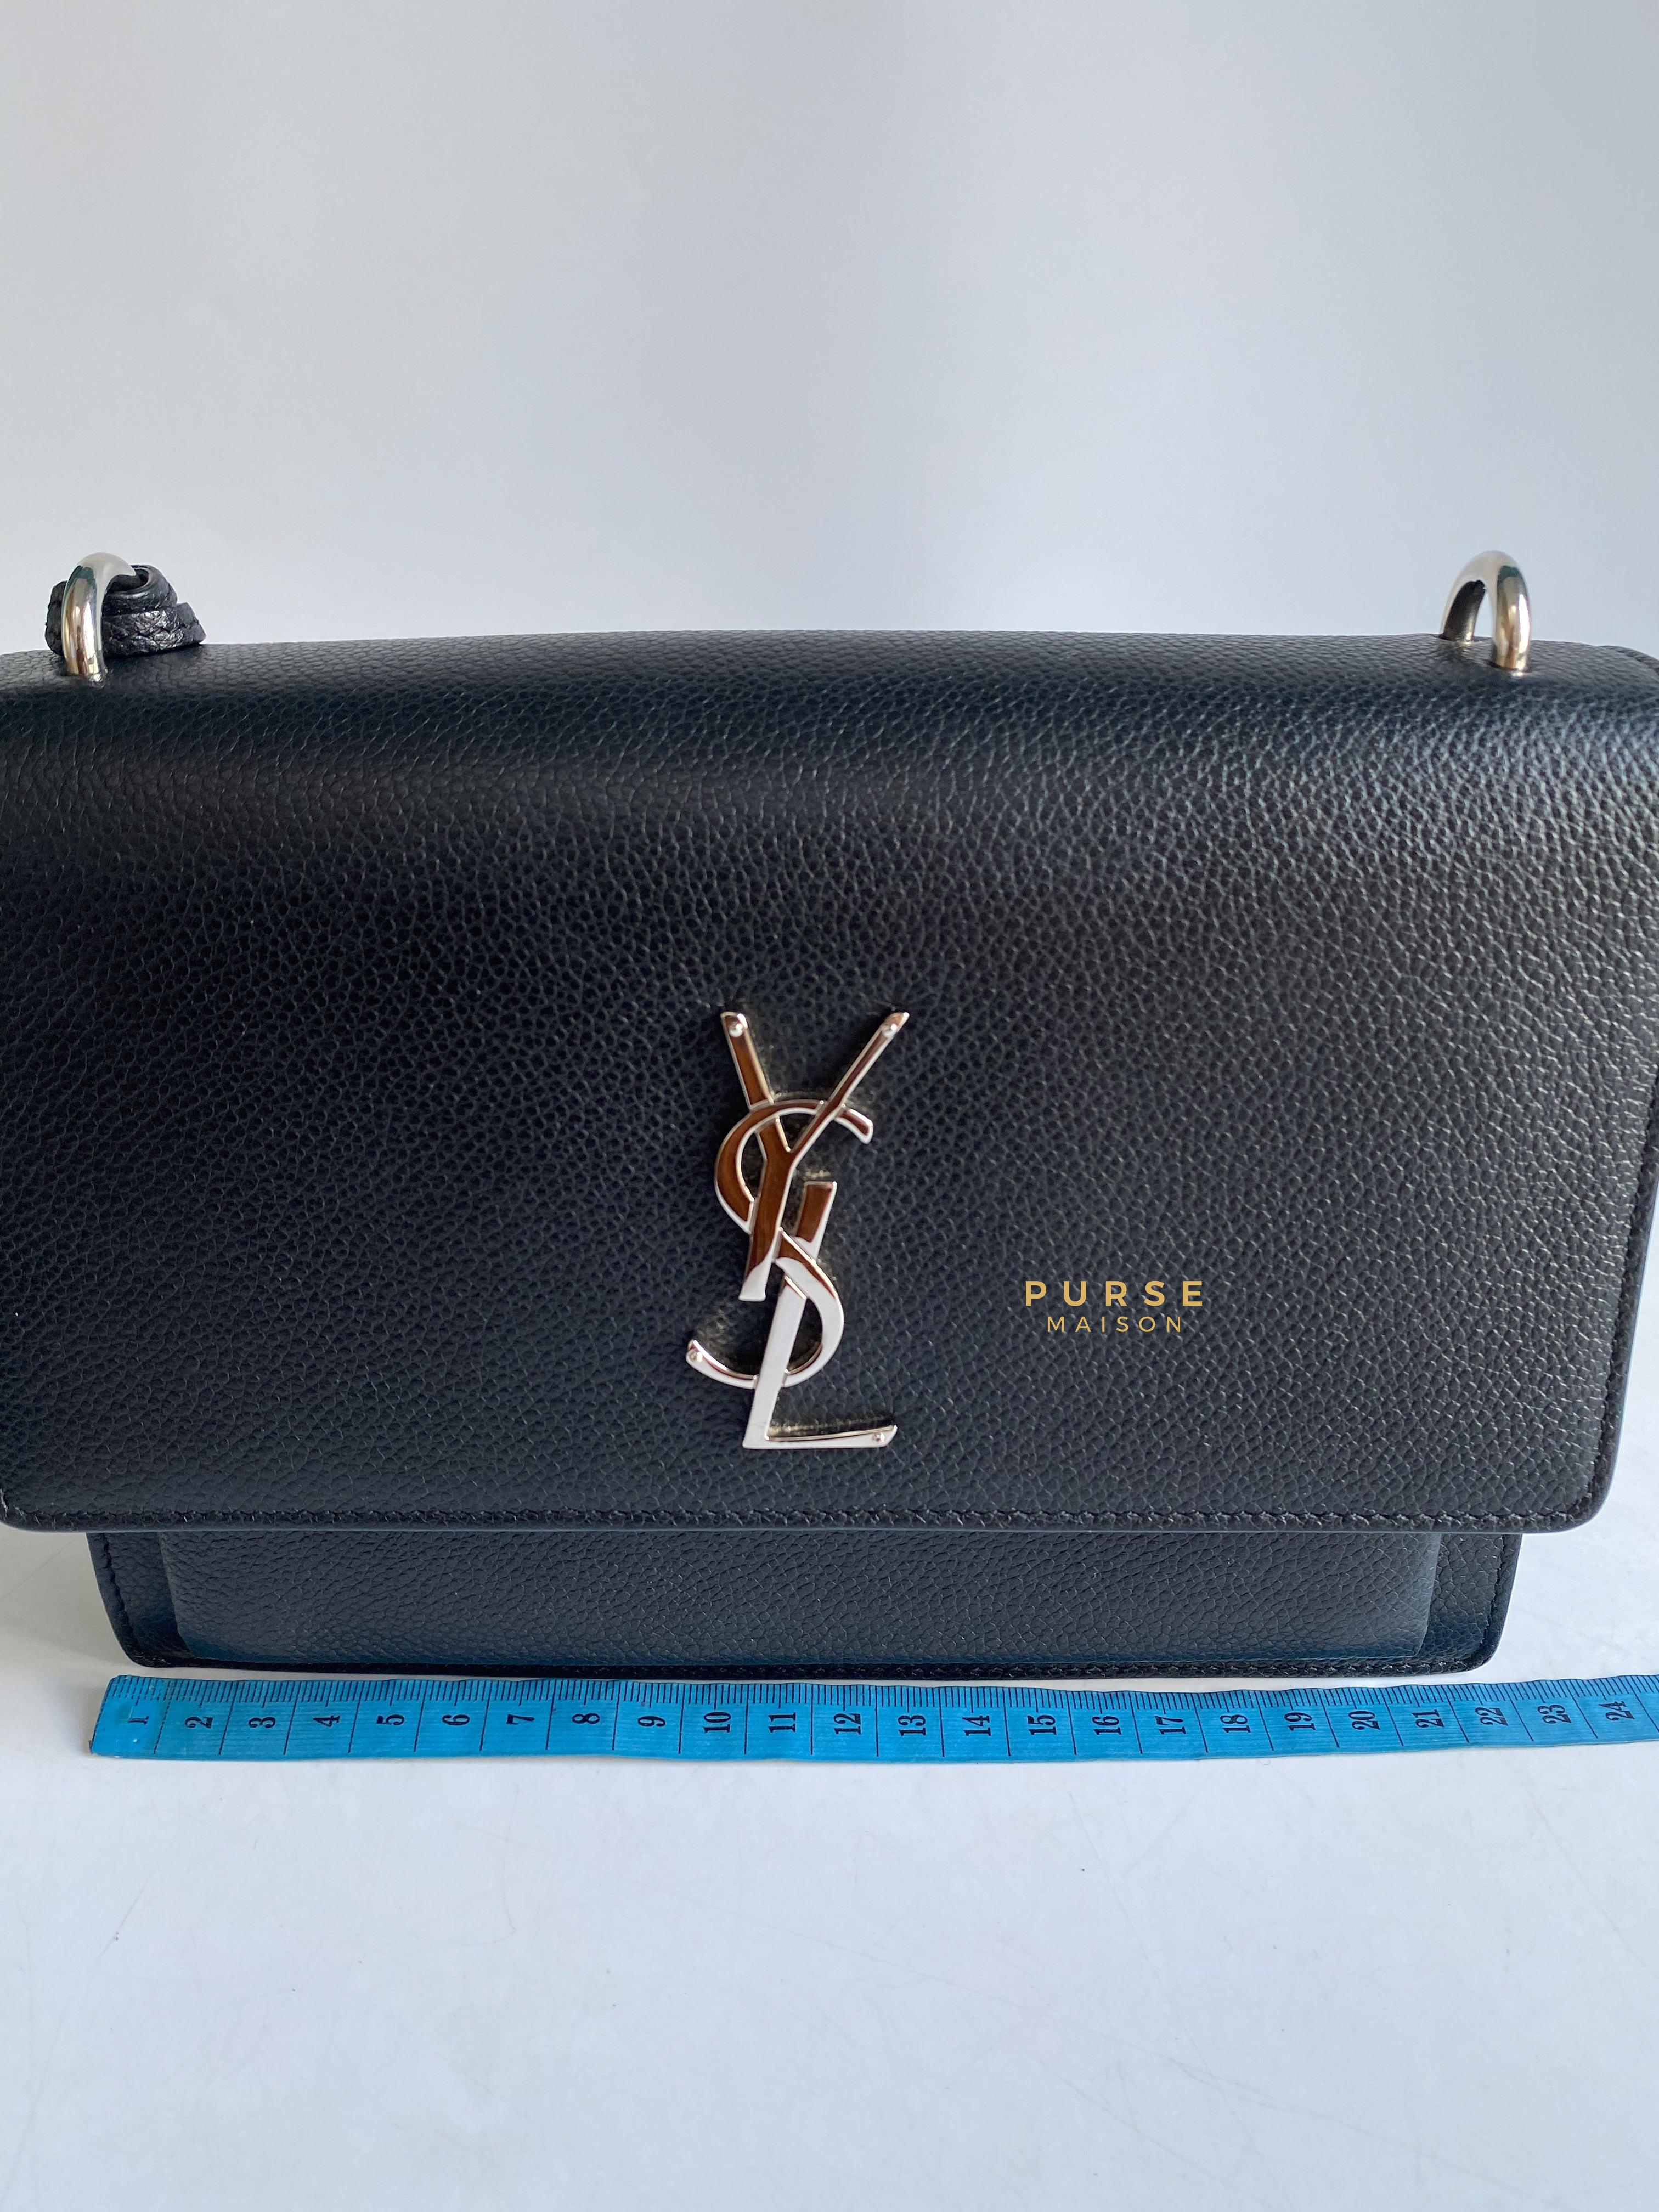 YSL Sunset Black Grained calfskin Leather in Silver Hardware | Purse Maison Luxury Bags Shop